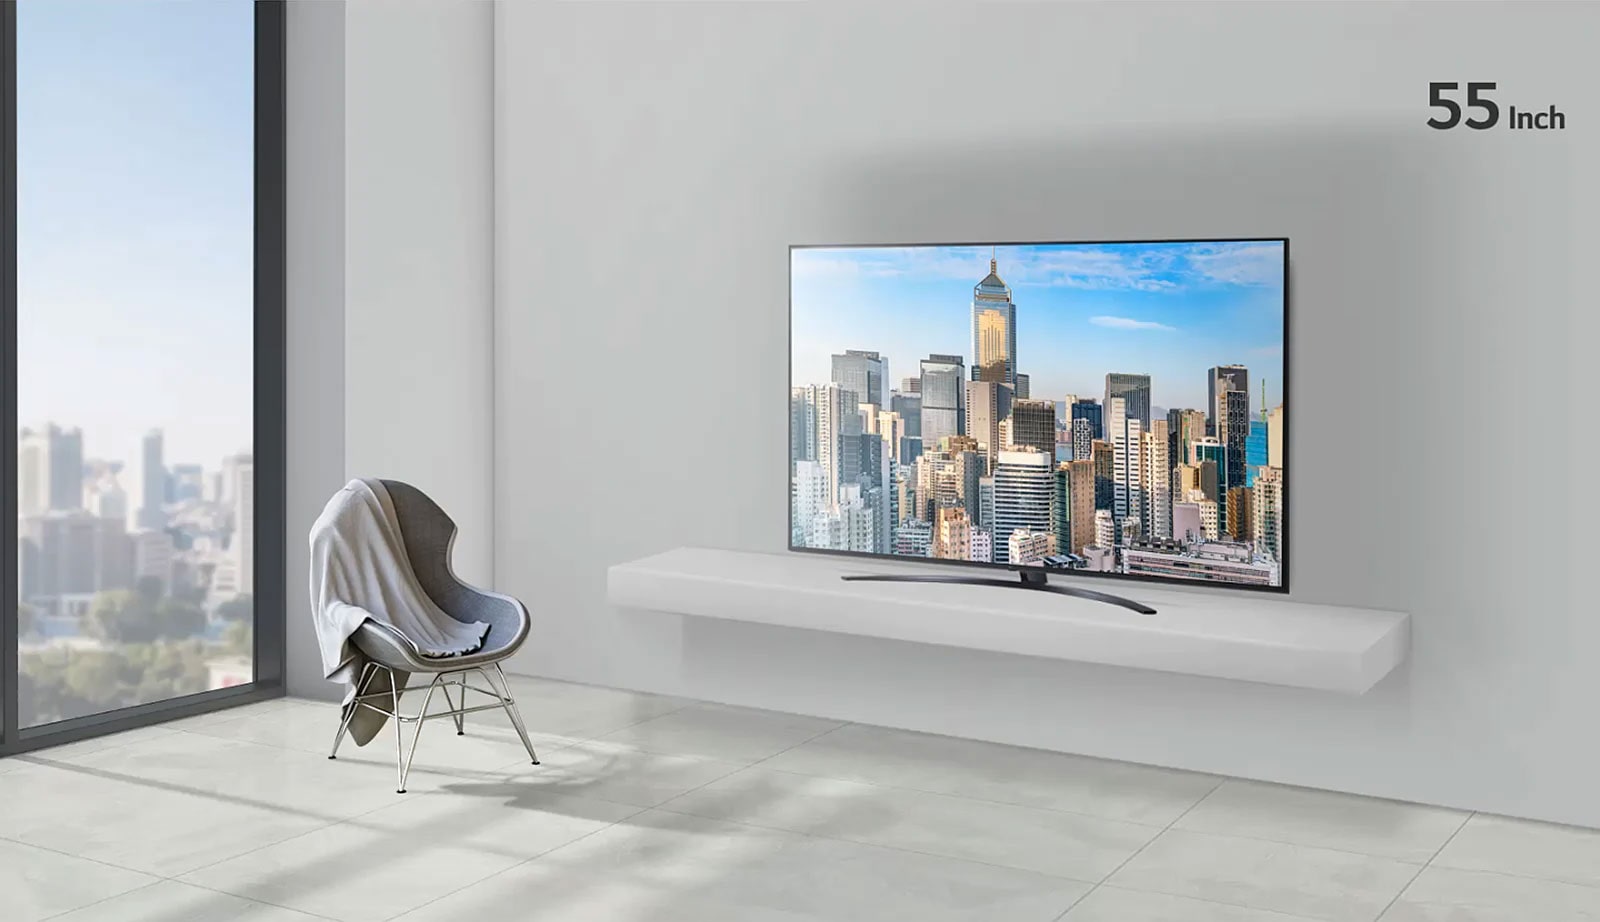 The size of a TV displaying skyscrapers in an office increases from 55 inches to 86 inches